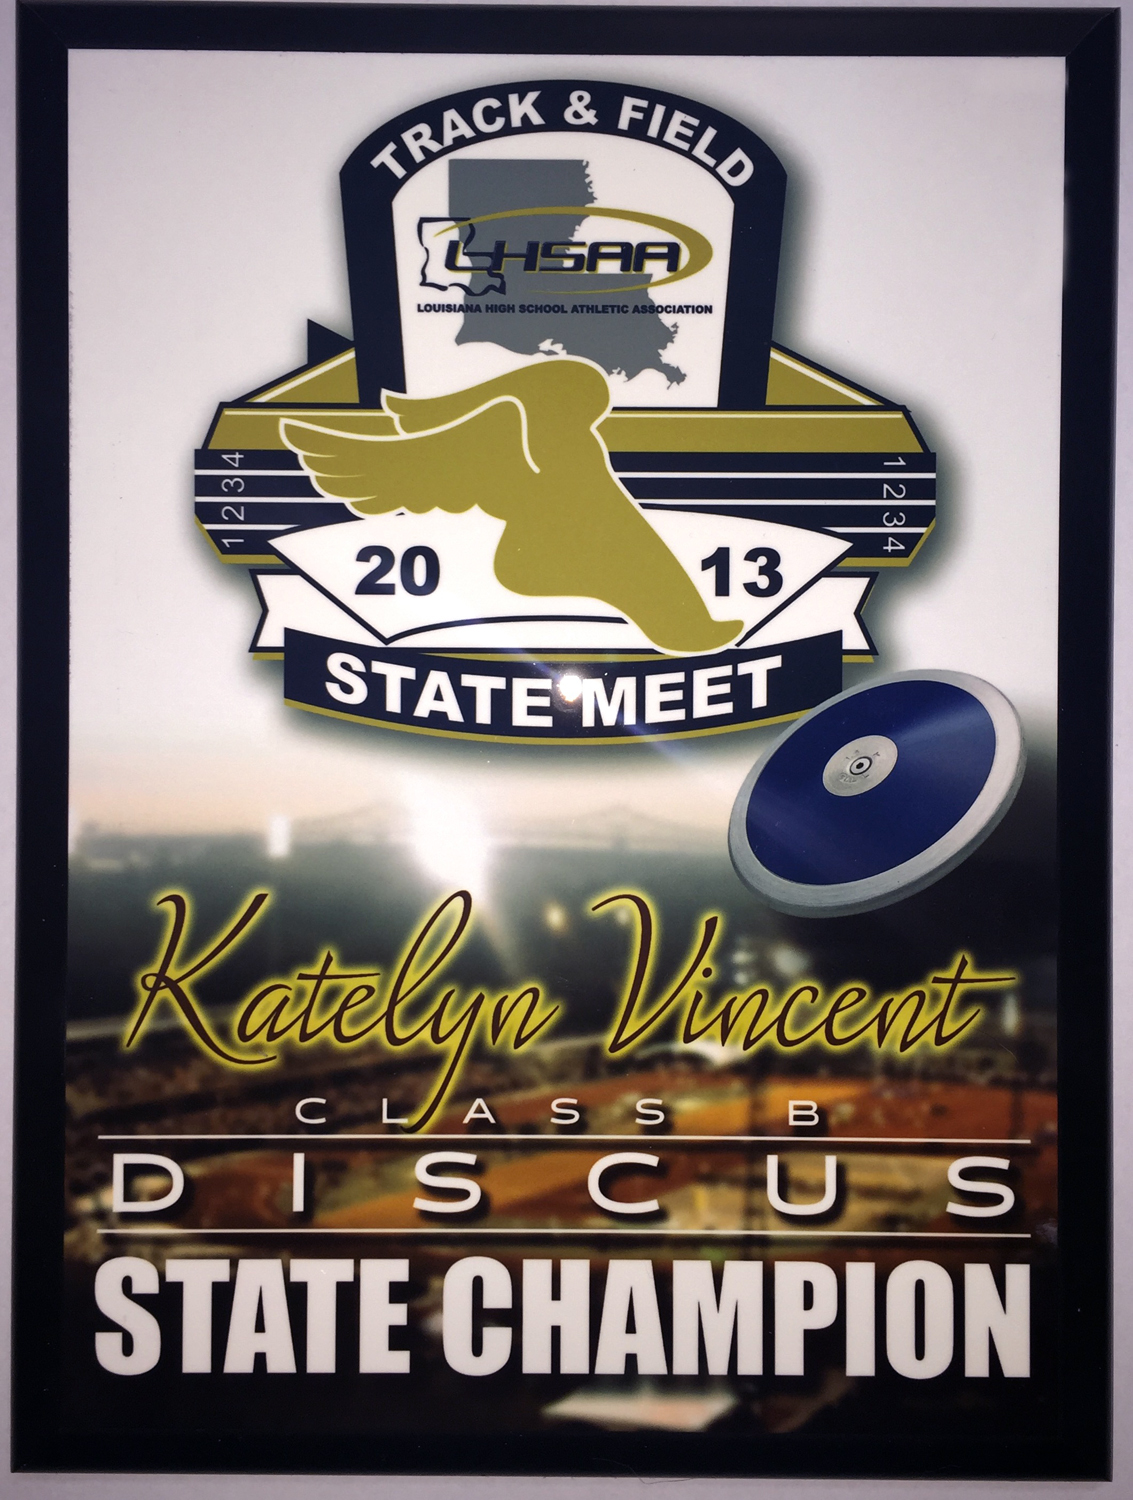 State Discus Champion made with sublimation printing